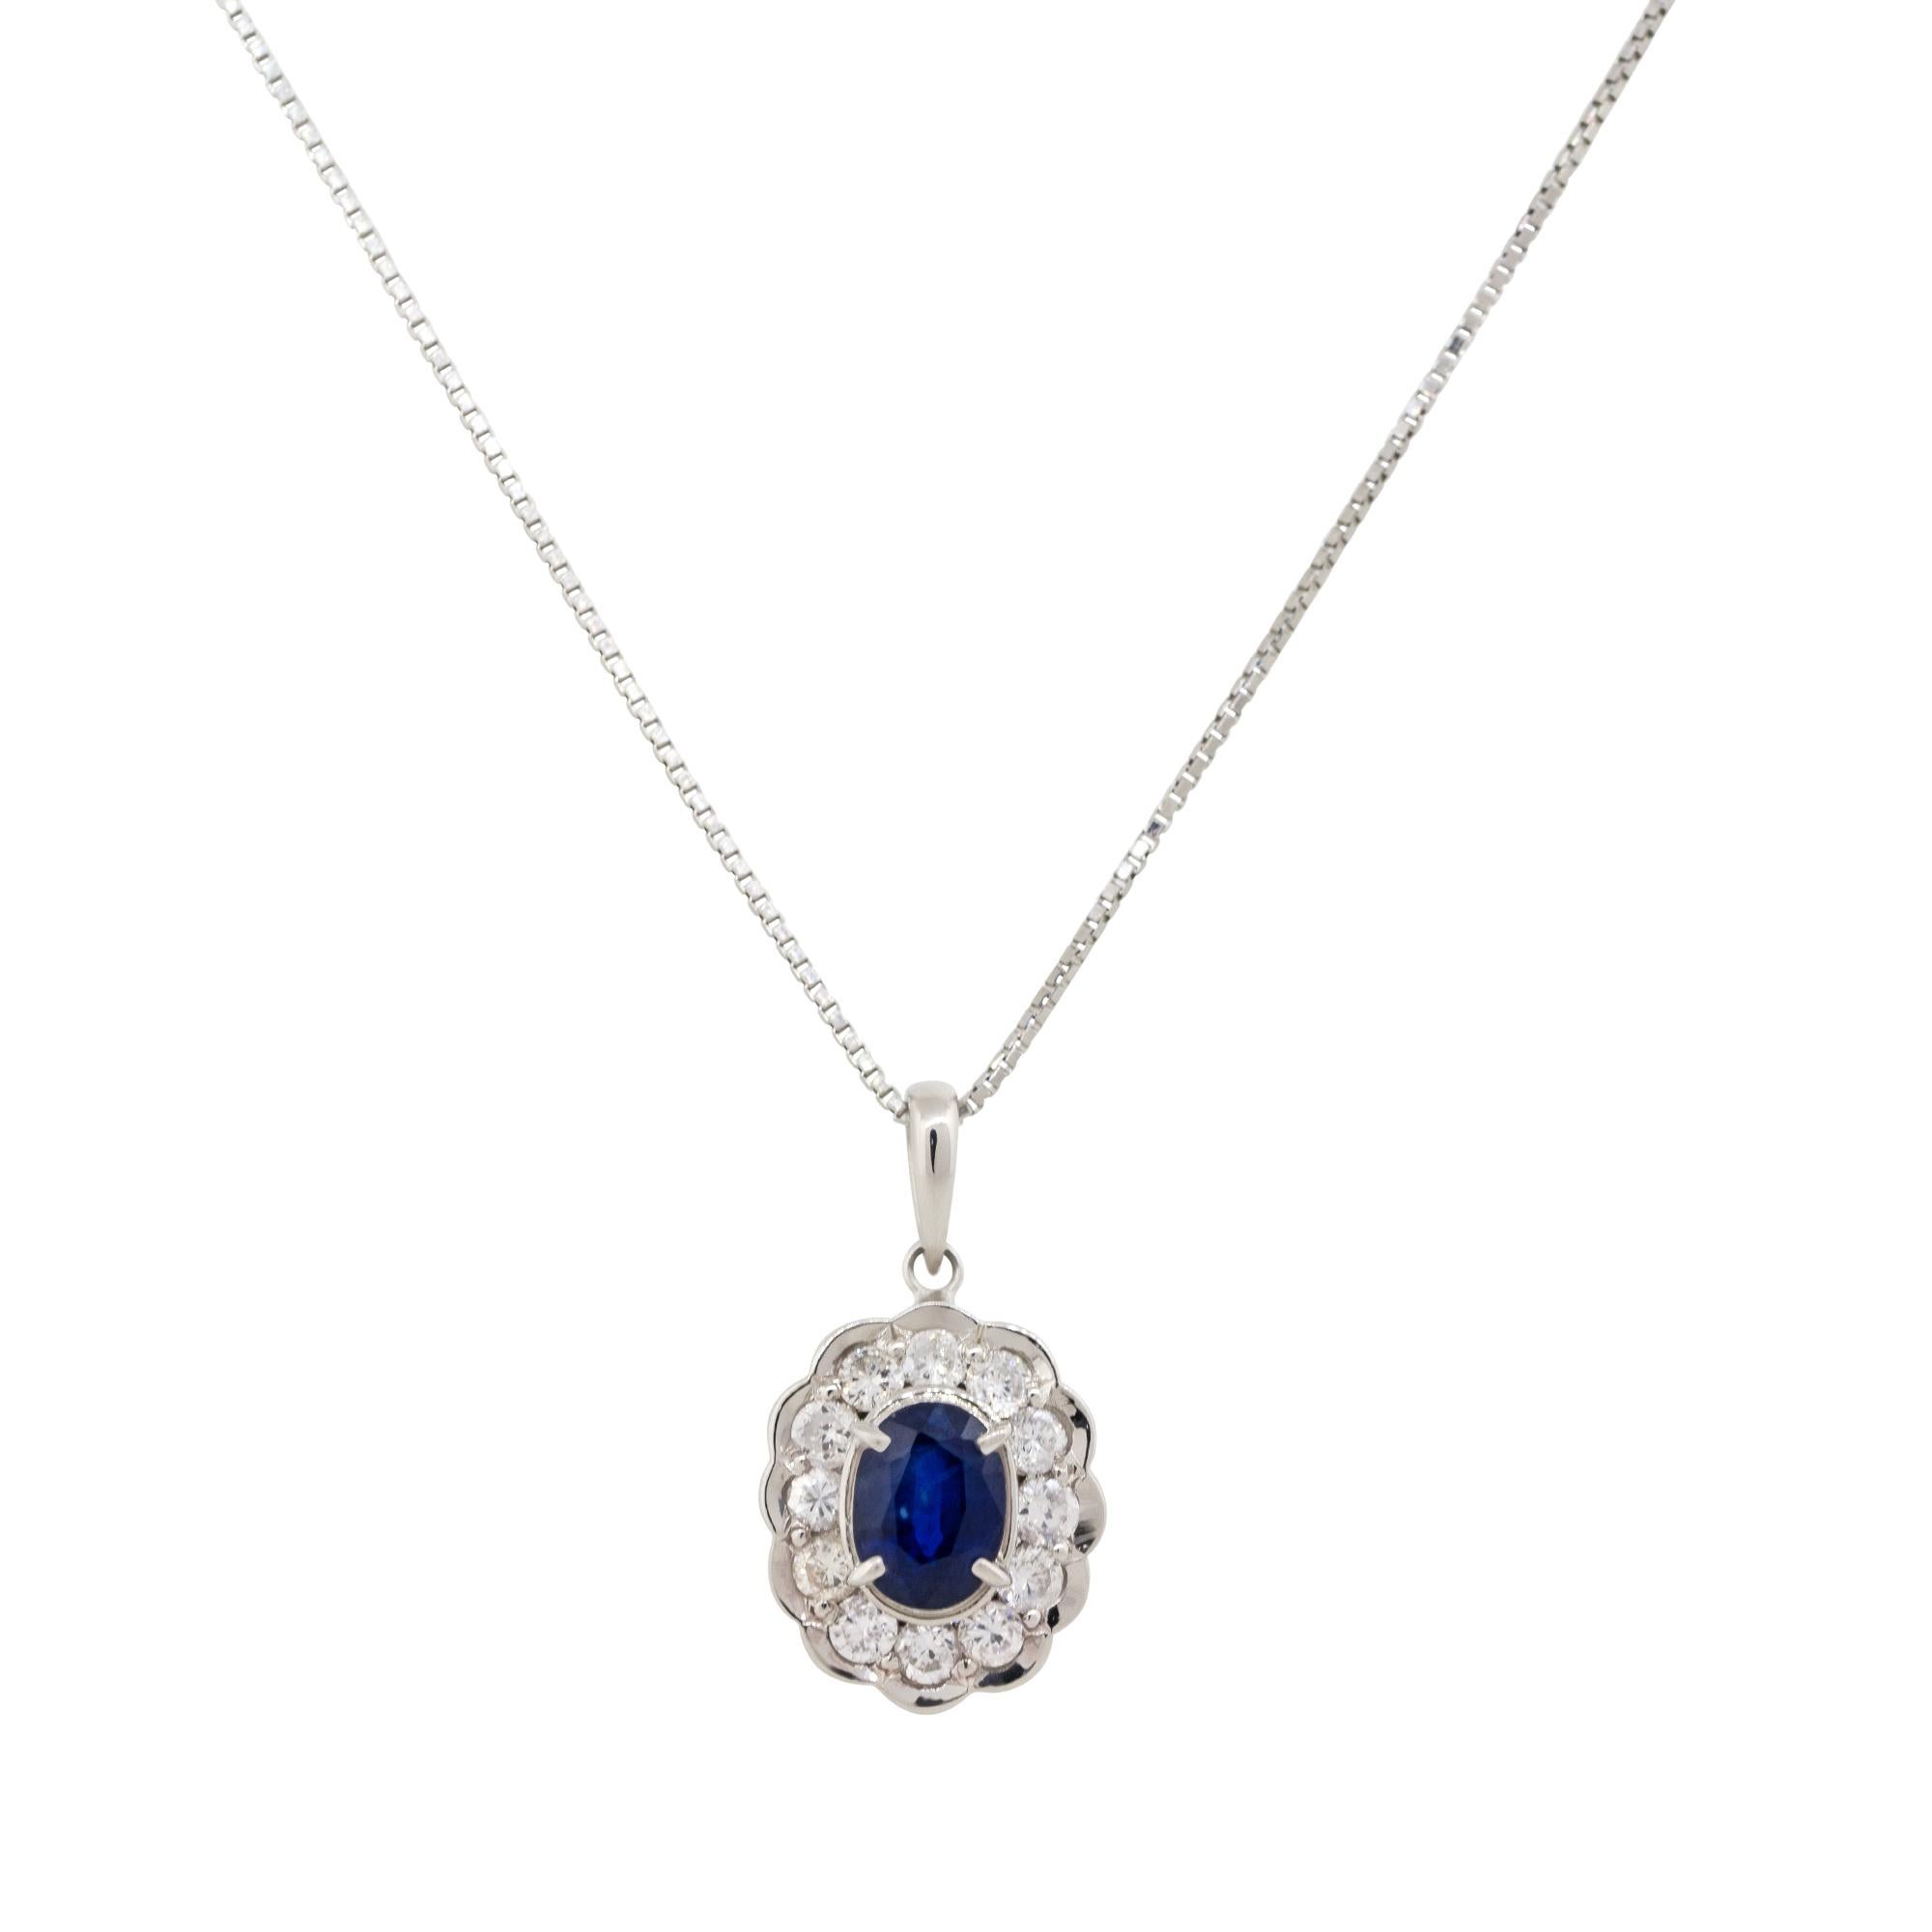 Material: Platinum
Diamond Details: Approx. 0.70ctw of round cut Diamonds. Diamonds are G/H in color and VS in clarity
Gemstone Details: Approx. 1.37ctw oval cut Sapphire gemstone
Clasps: Lobster clasp
Total Weight: 6.8g (4.3dwt) 
Pendant